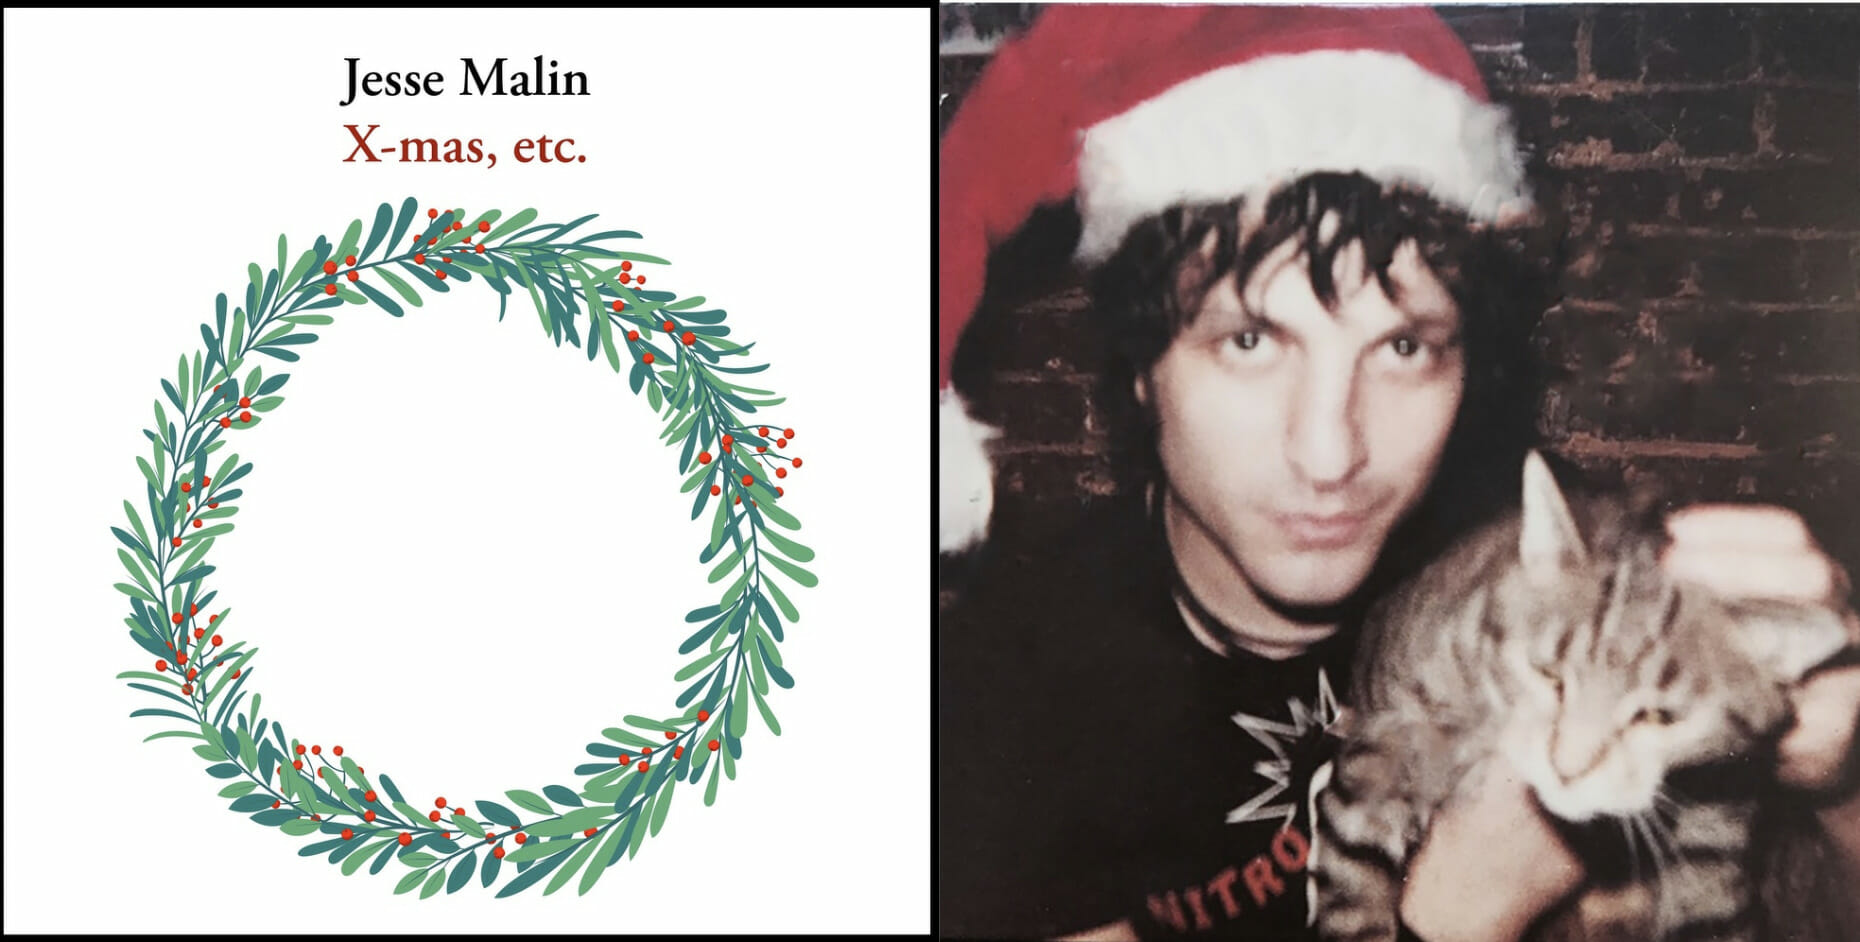 Jesse Malin Shares New Video for “Xmas, etc.” in Celebration of 20th Anniversary Rerelease of Debut LP